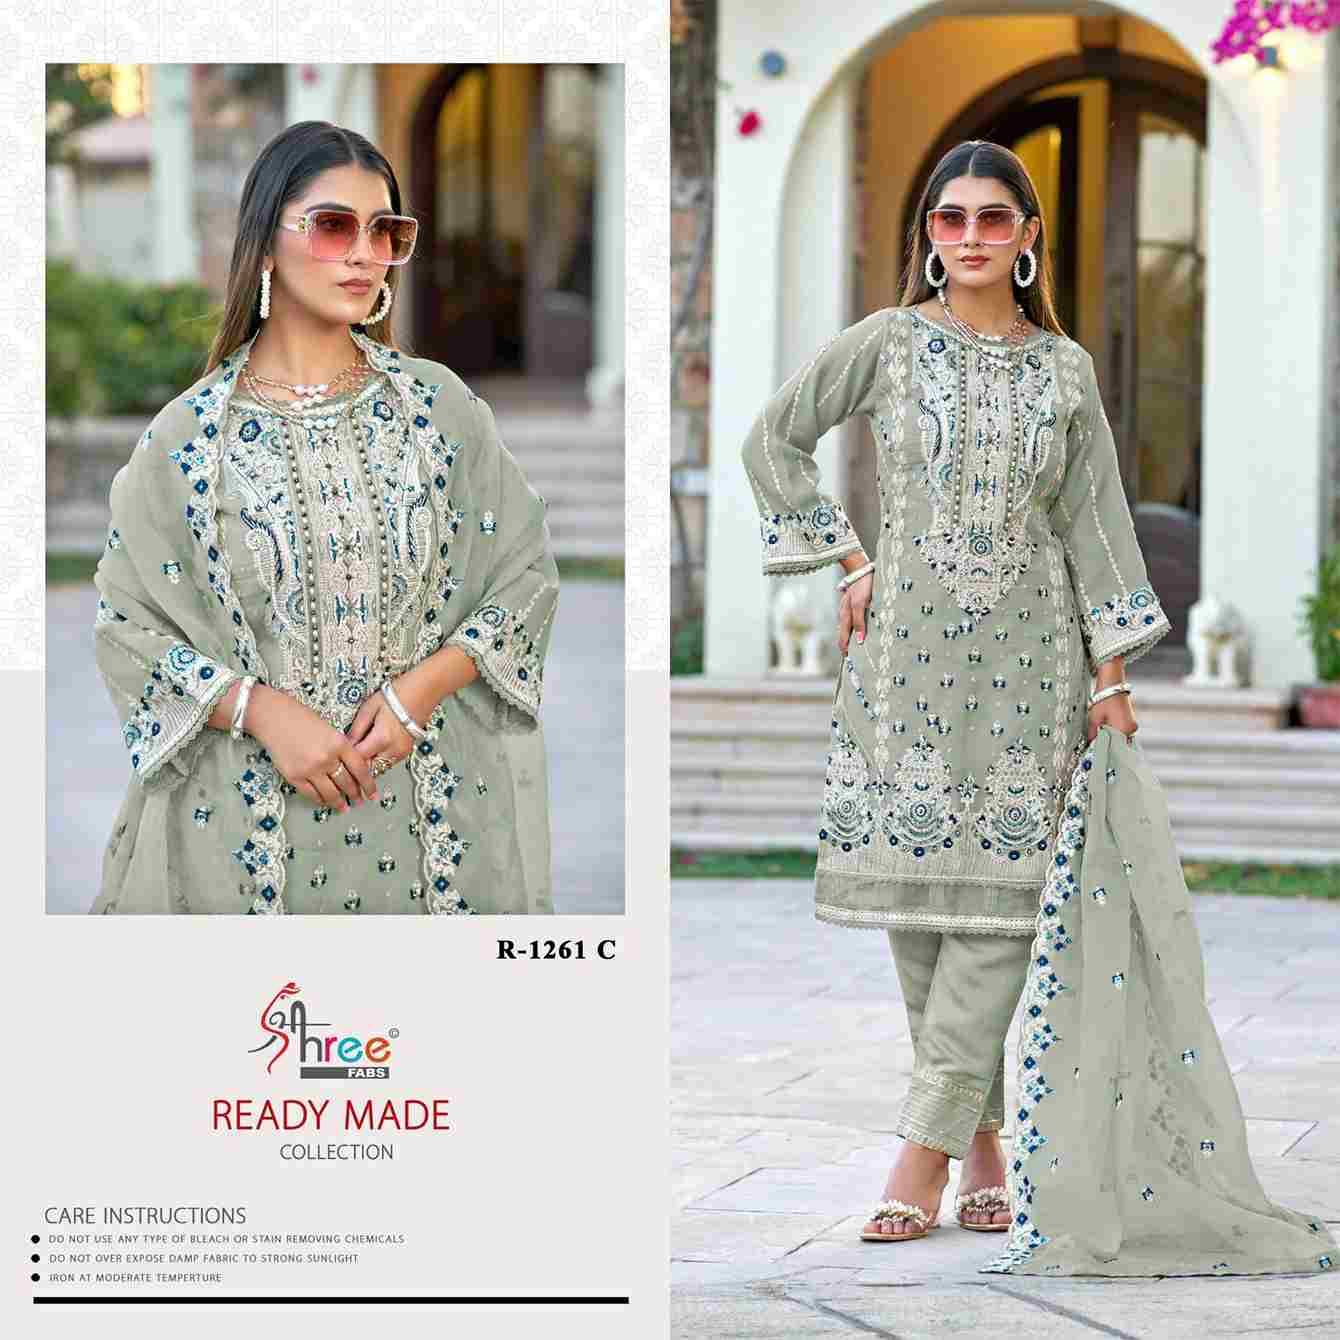 Shree Fabs Hit Design R-1261 Colours By Shree Fabs R-1261-A To R-1261-D Series Beautiful Pakistani Suits Stylish Fancy Colorful Party Wear & Occasional Wear Pure Organza Embroidered Dresses At Wholesale Price